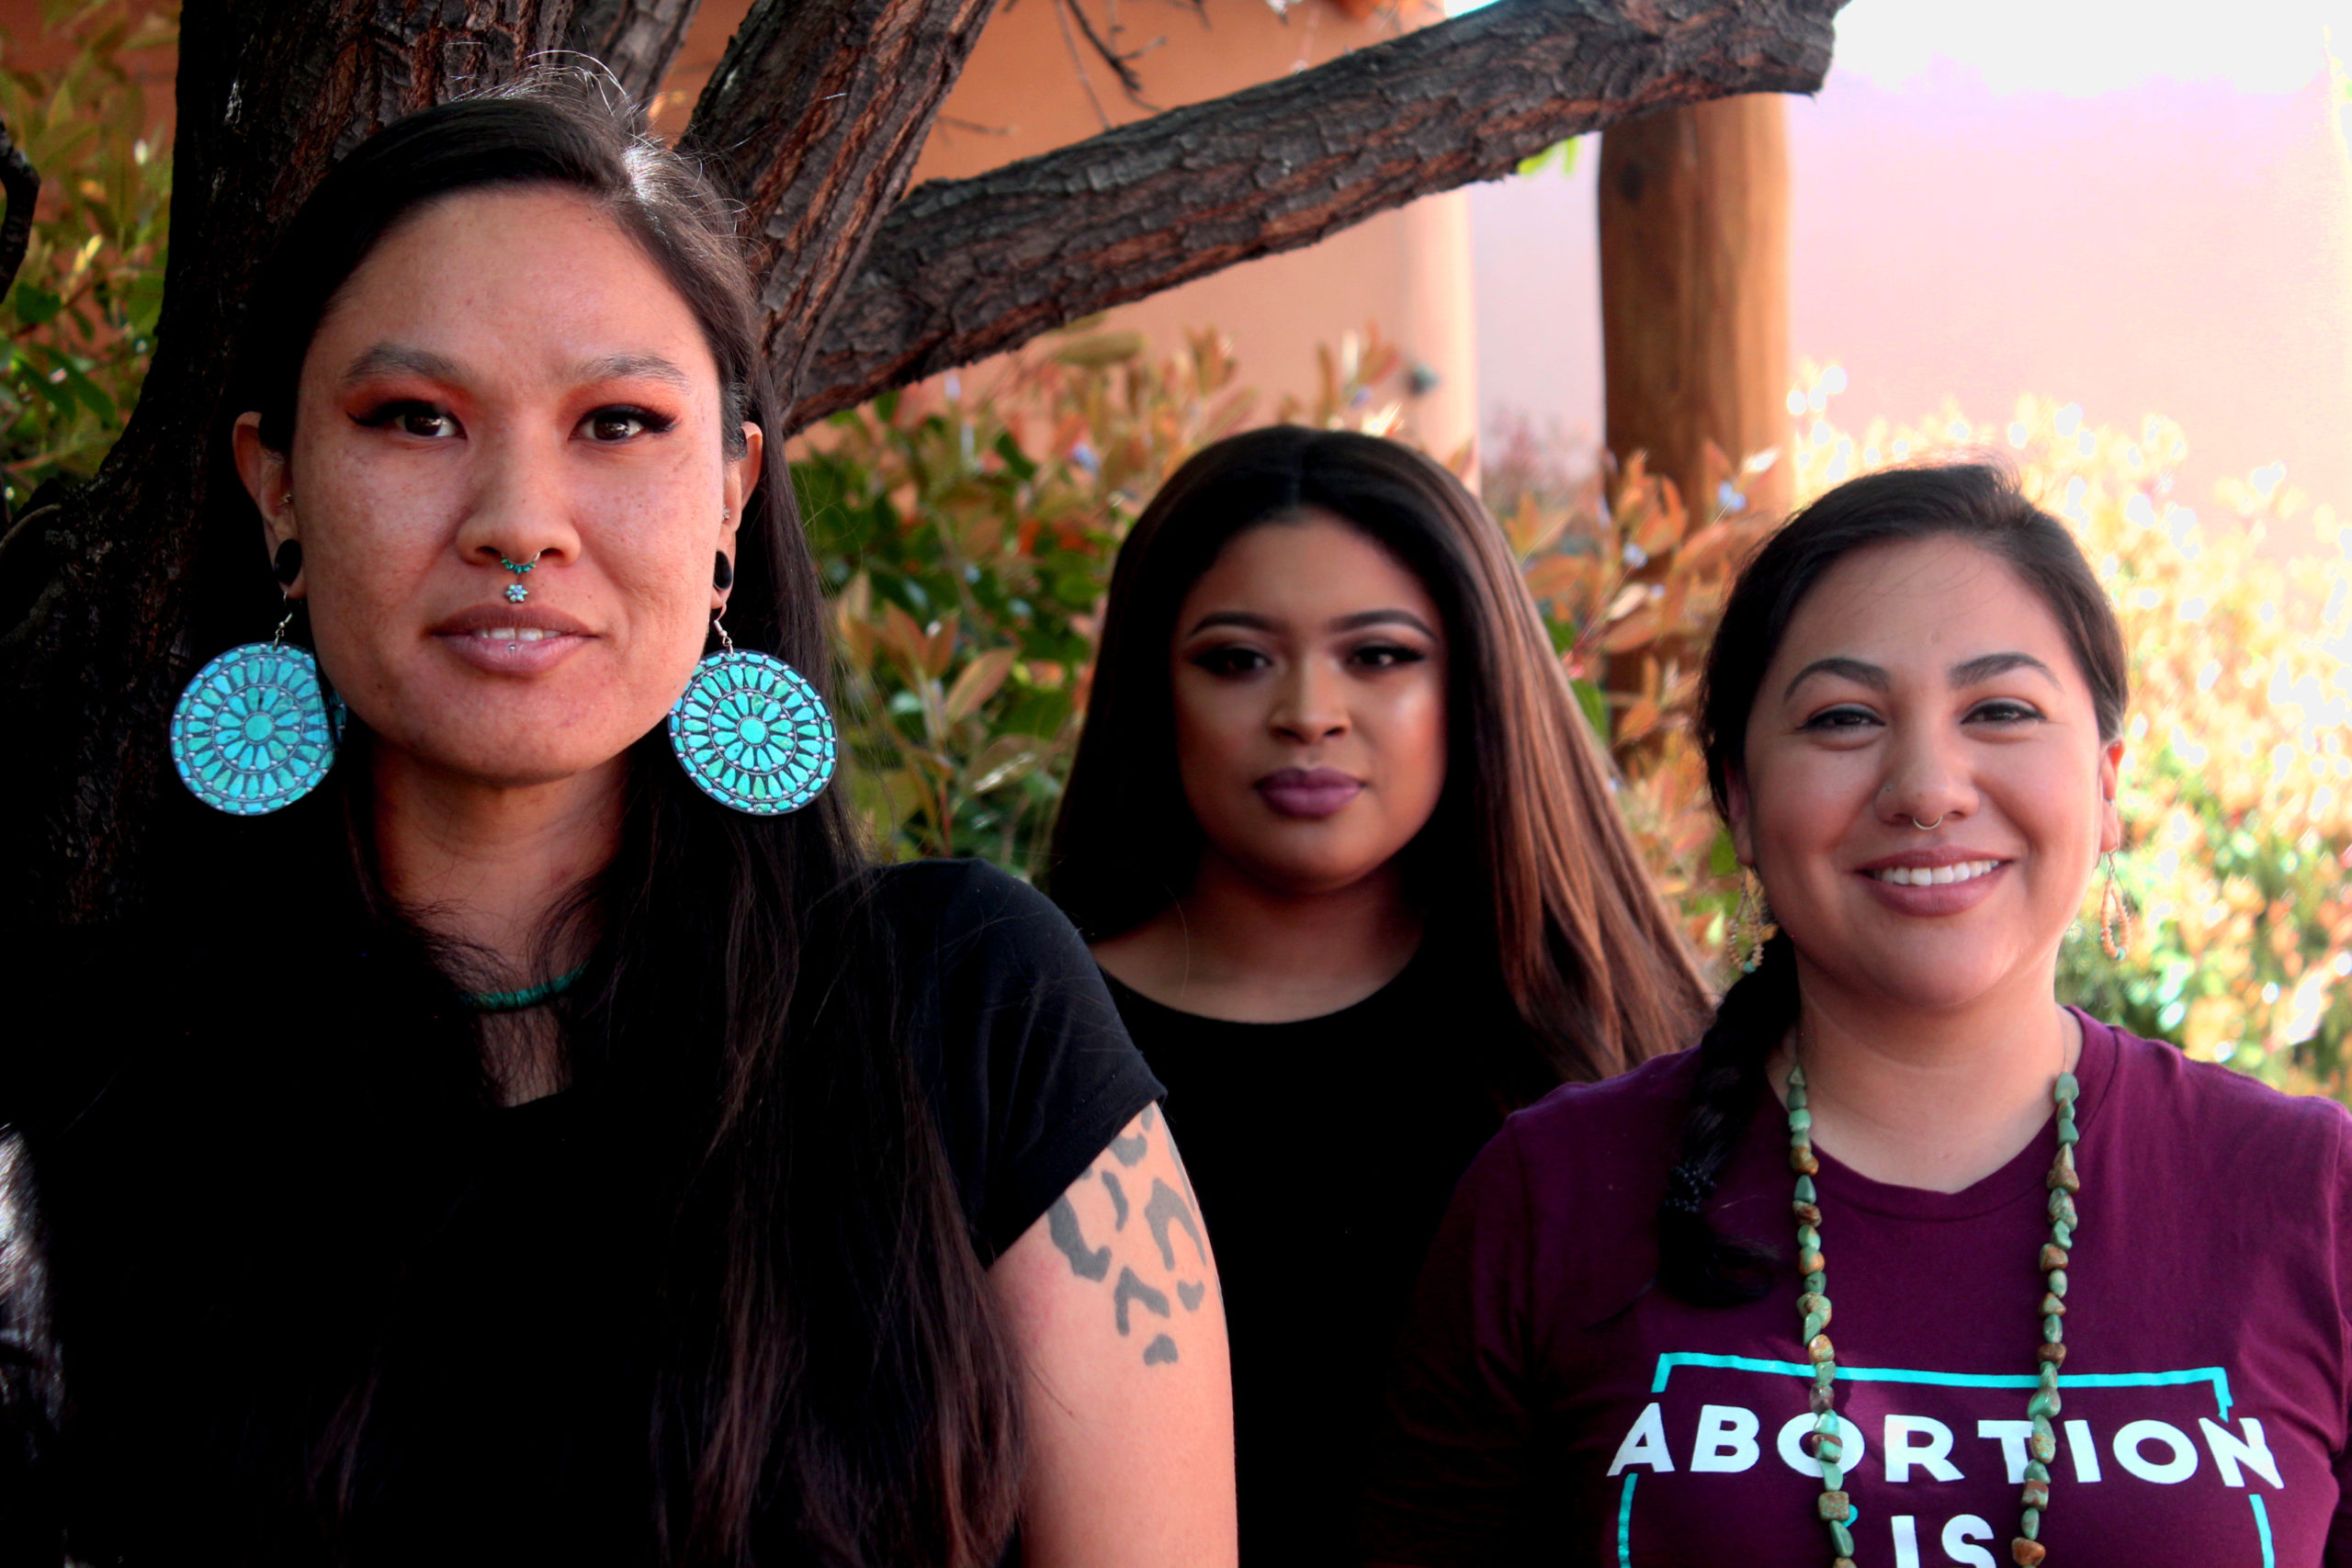 Once denied a necessary abortion, Indigenous Women Rising co-founder speaks out